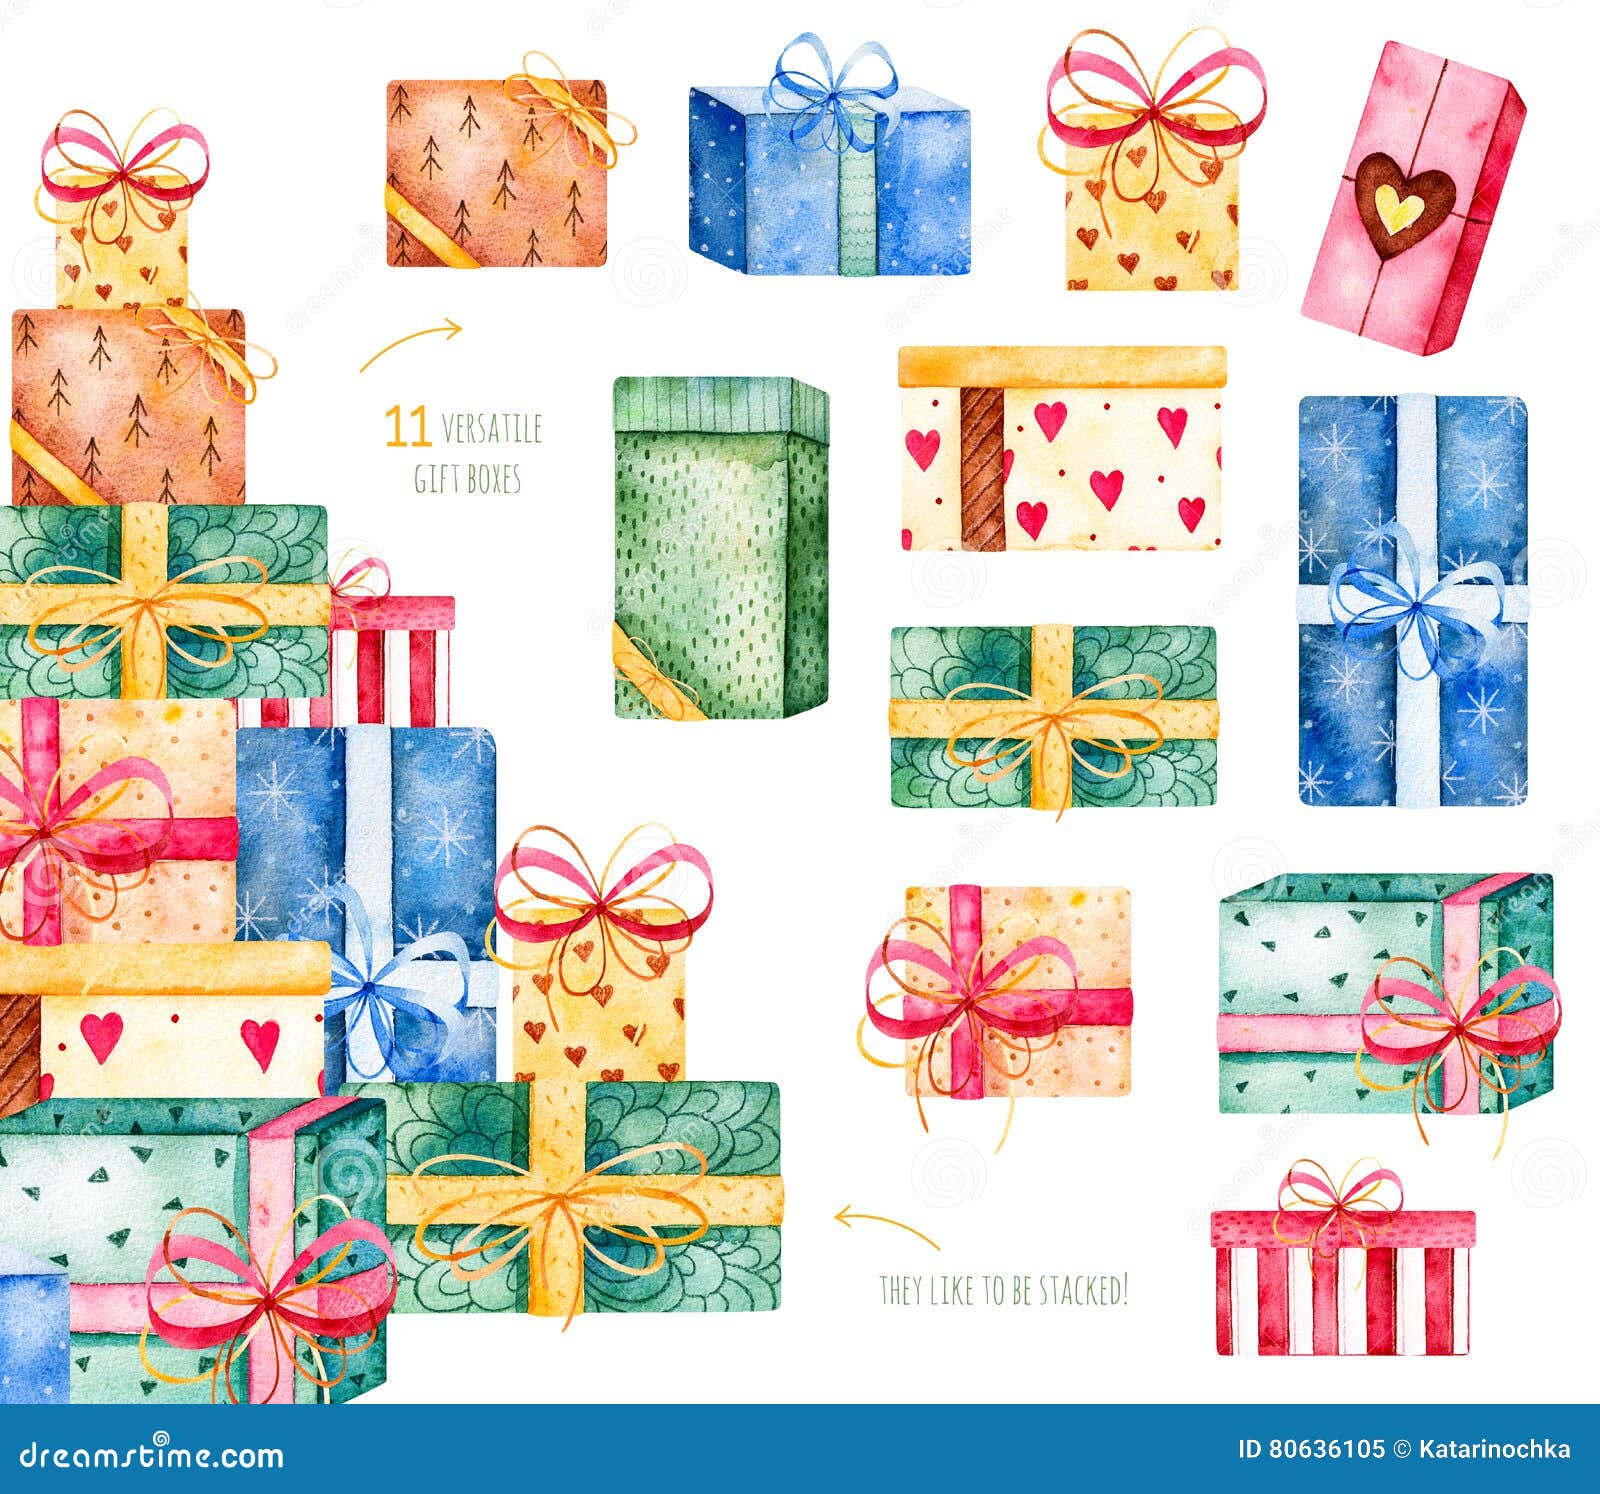 set with 11 versatile gift boxes